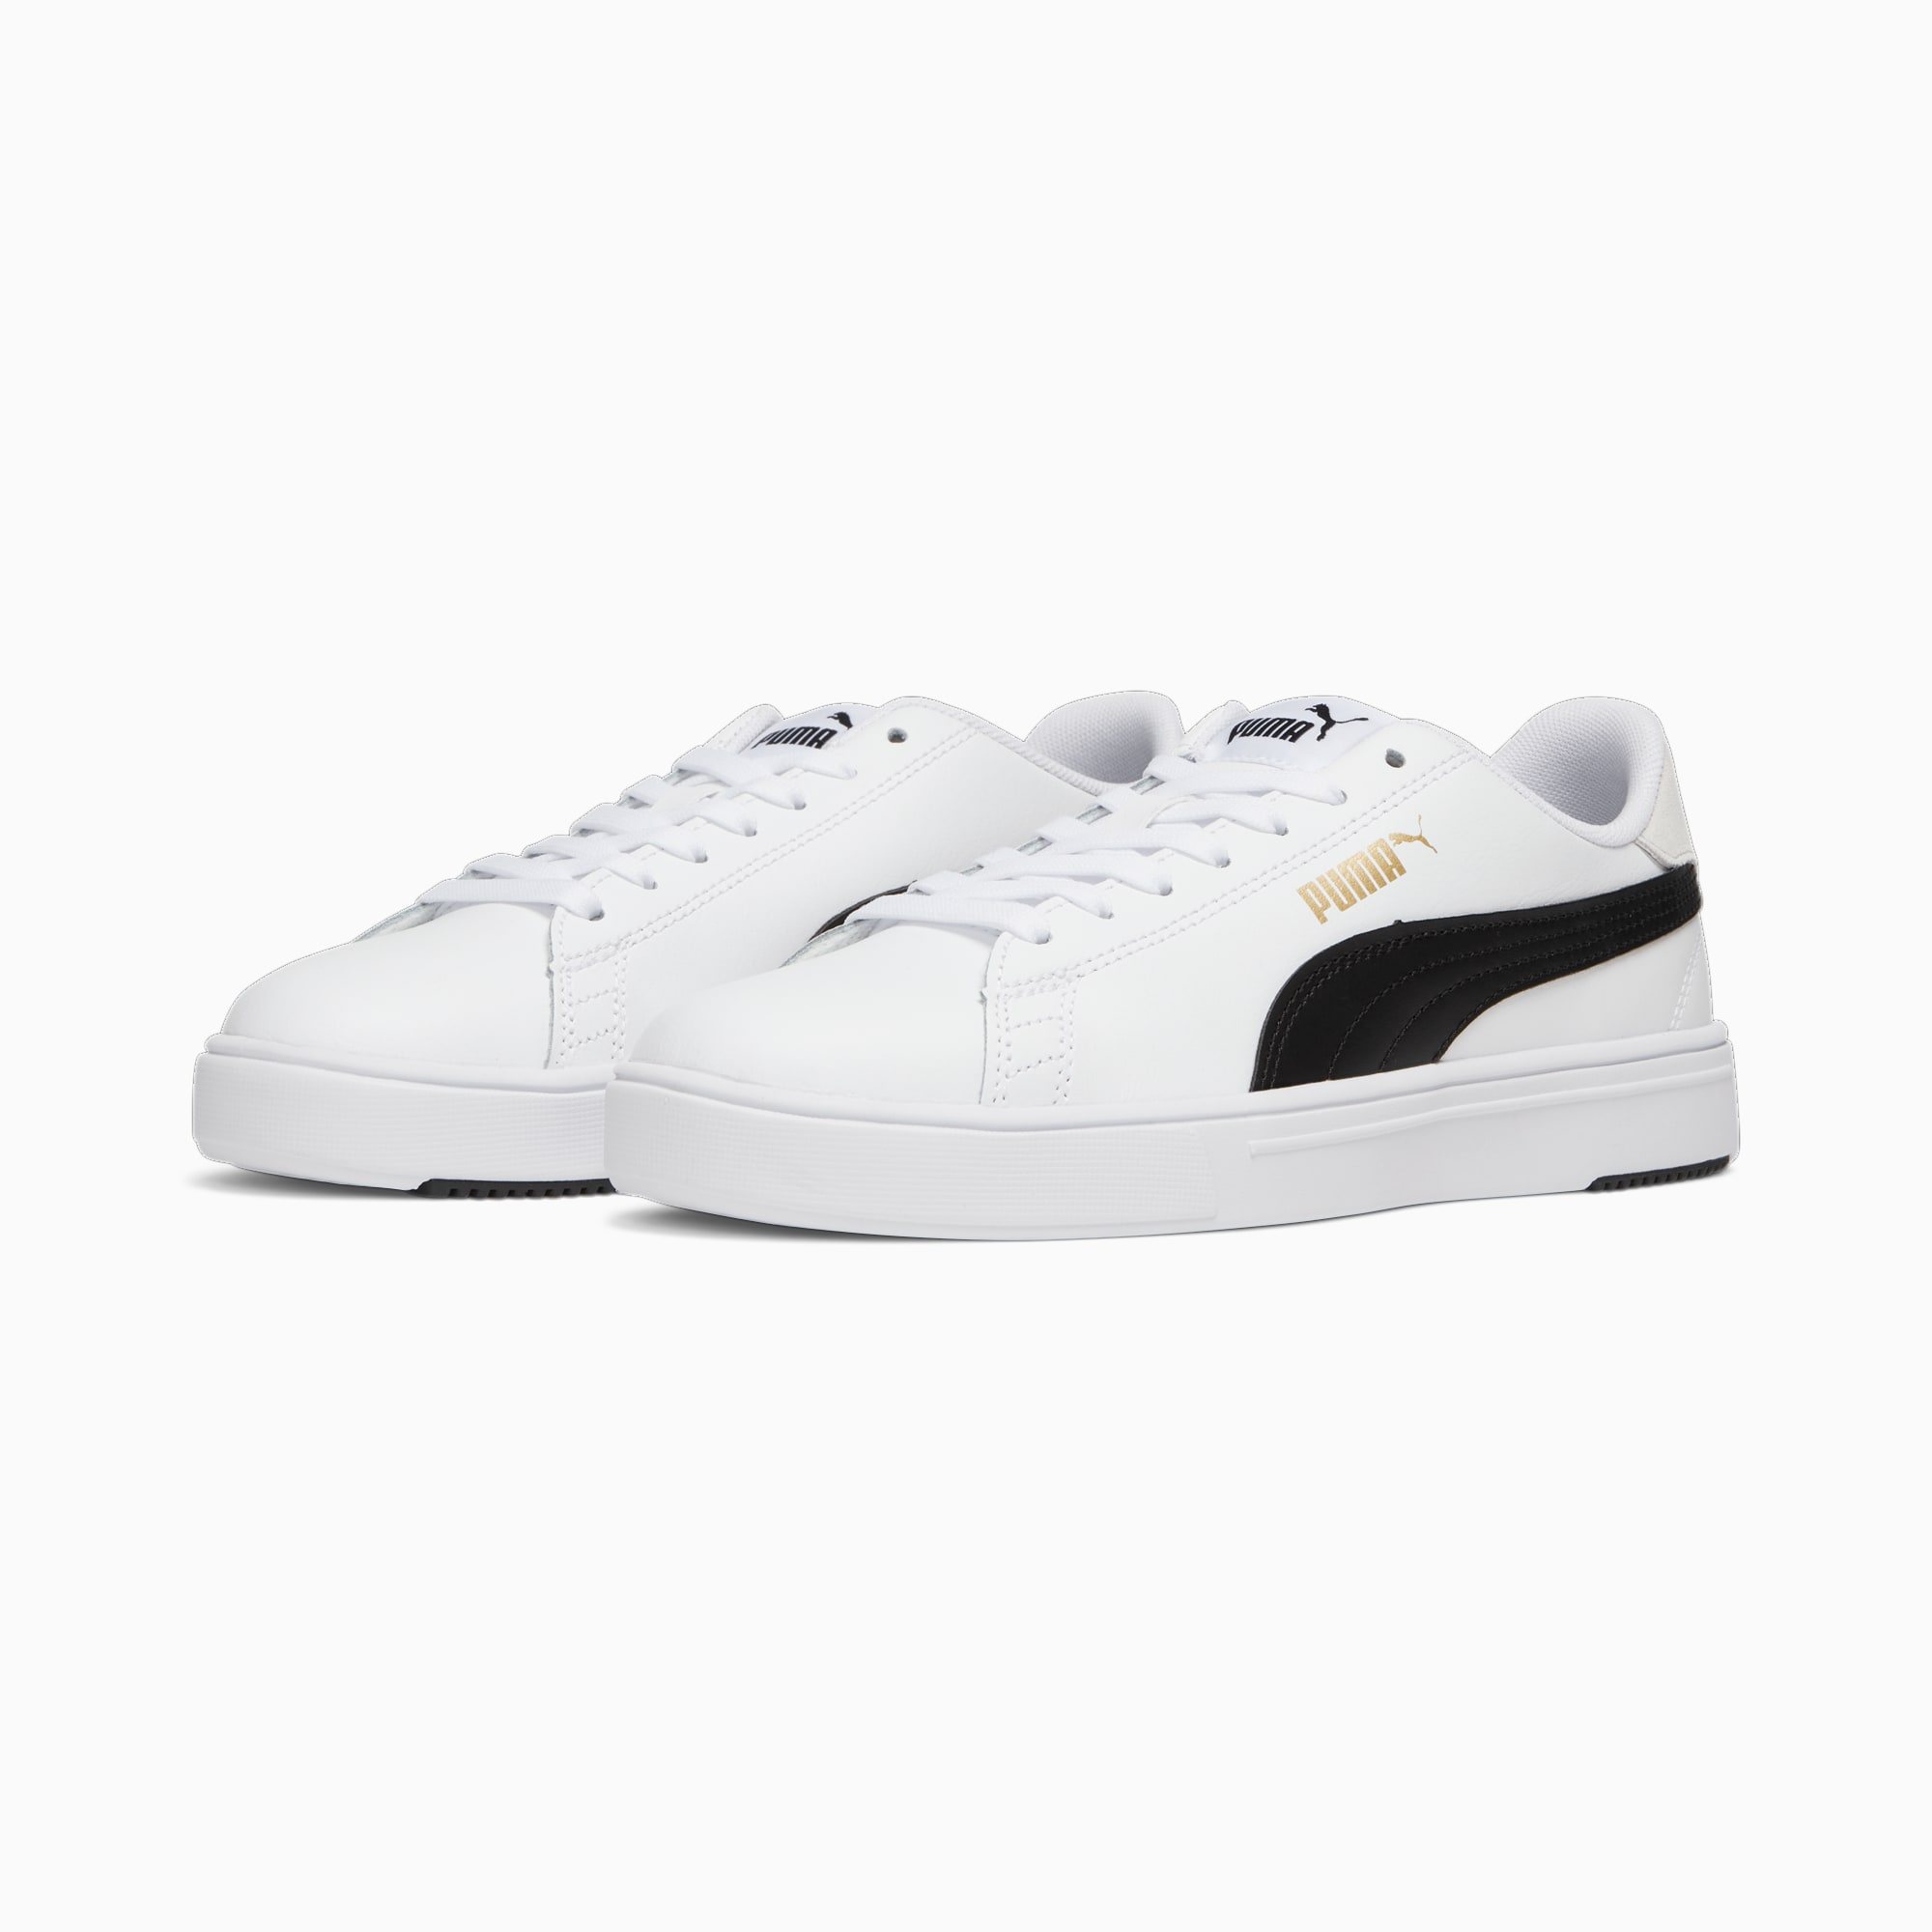 Puma Women's Shoes (Standard & Wide): Up to 50% Off + Extra 20% Off: Serve Pro Lite Sneakers (3 colors) $23.20 & More + Free Shipping on $60+